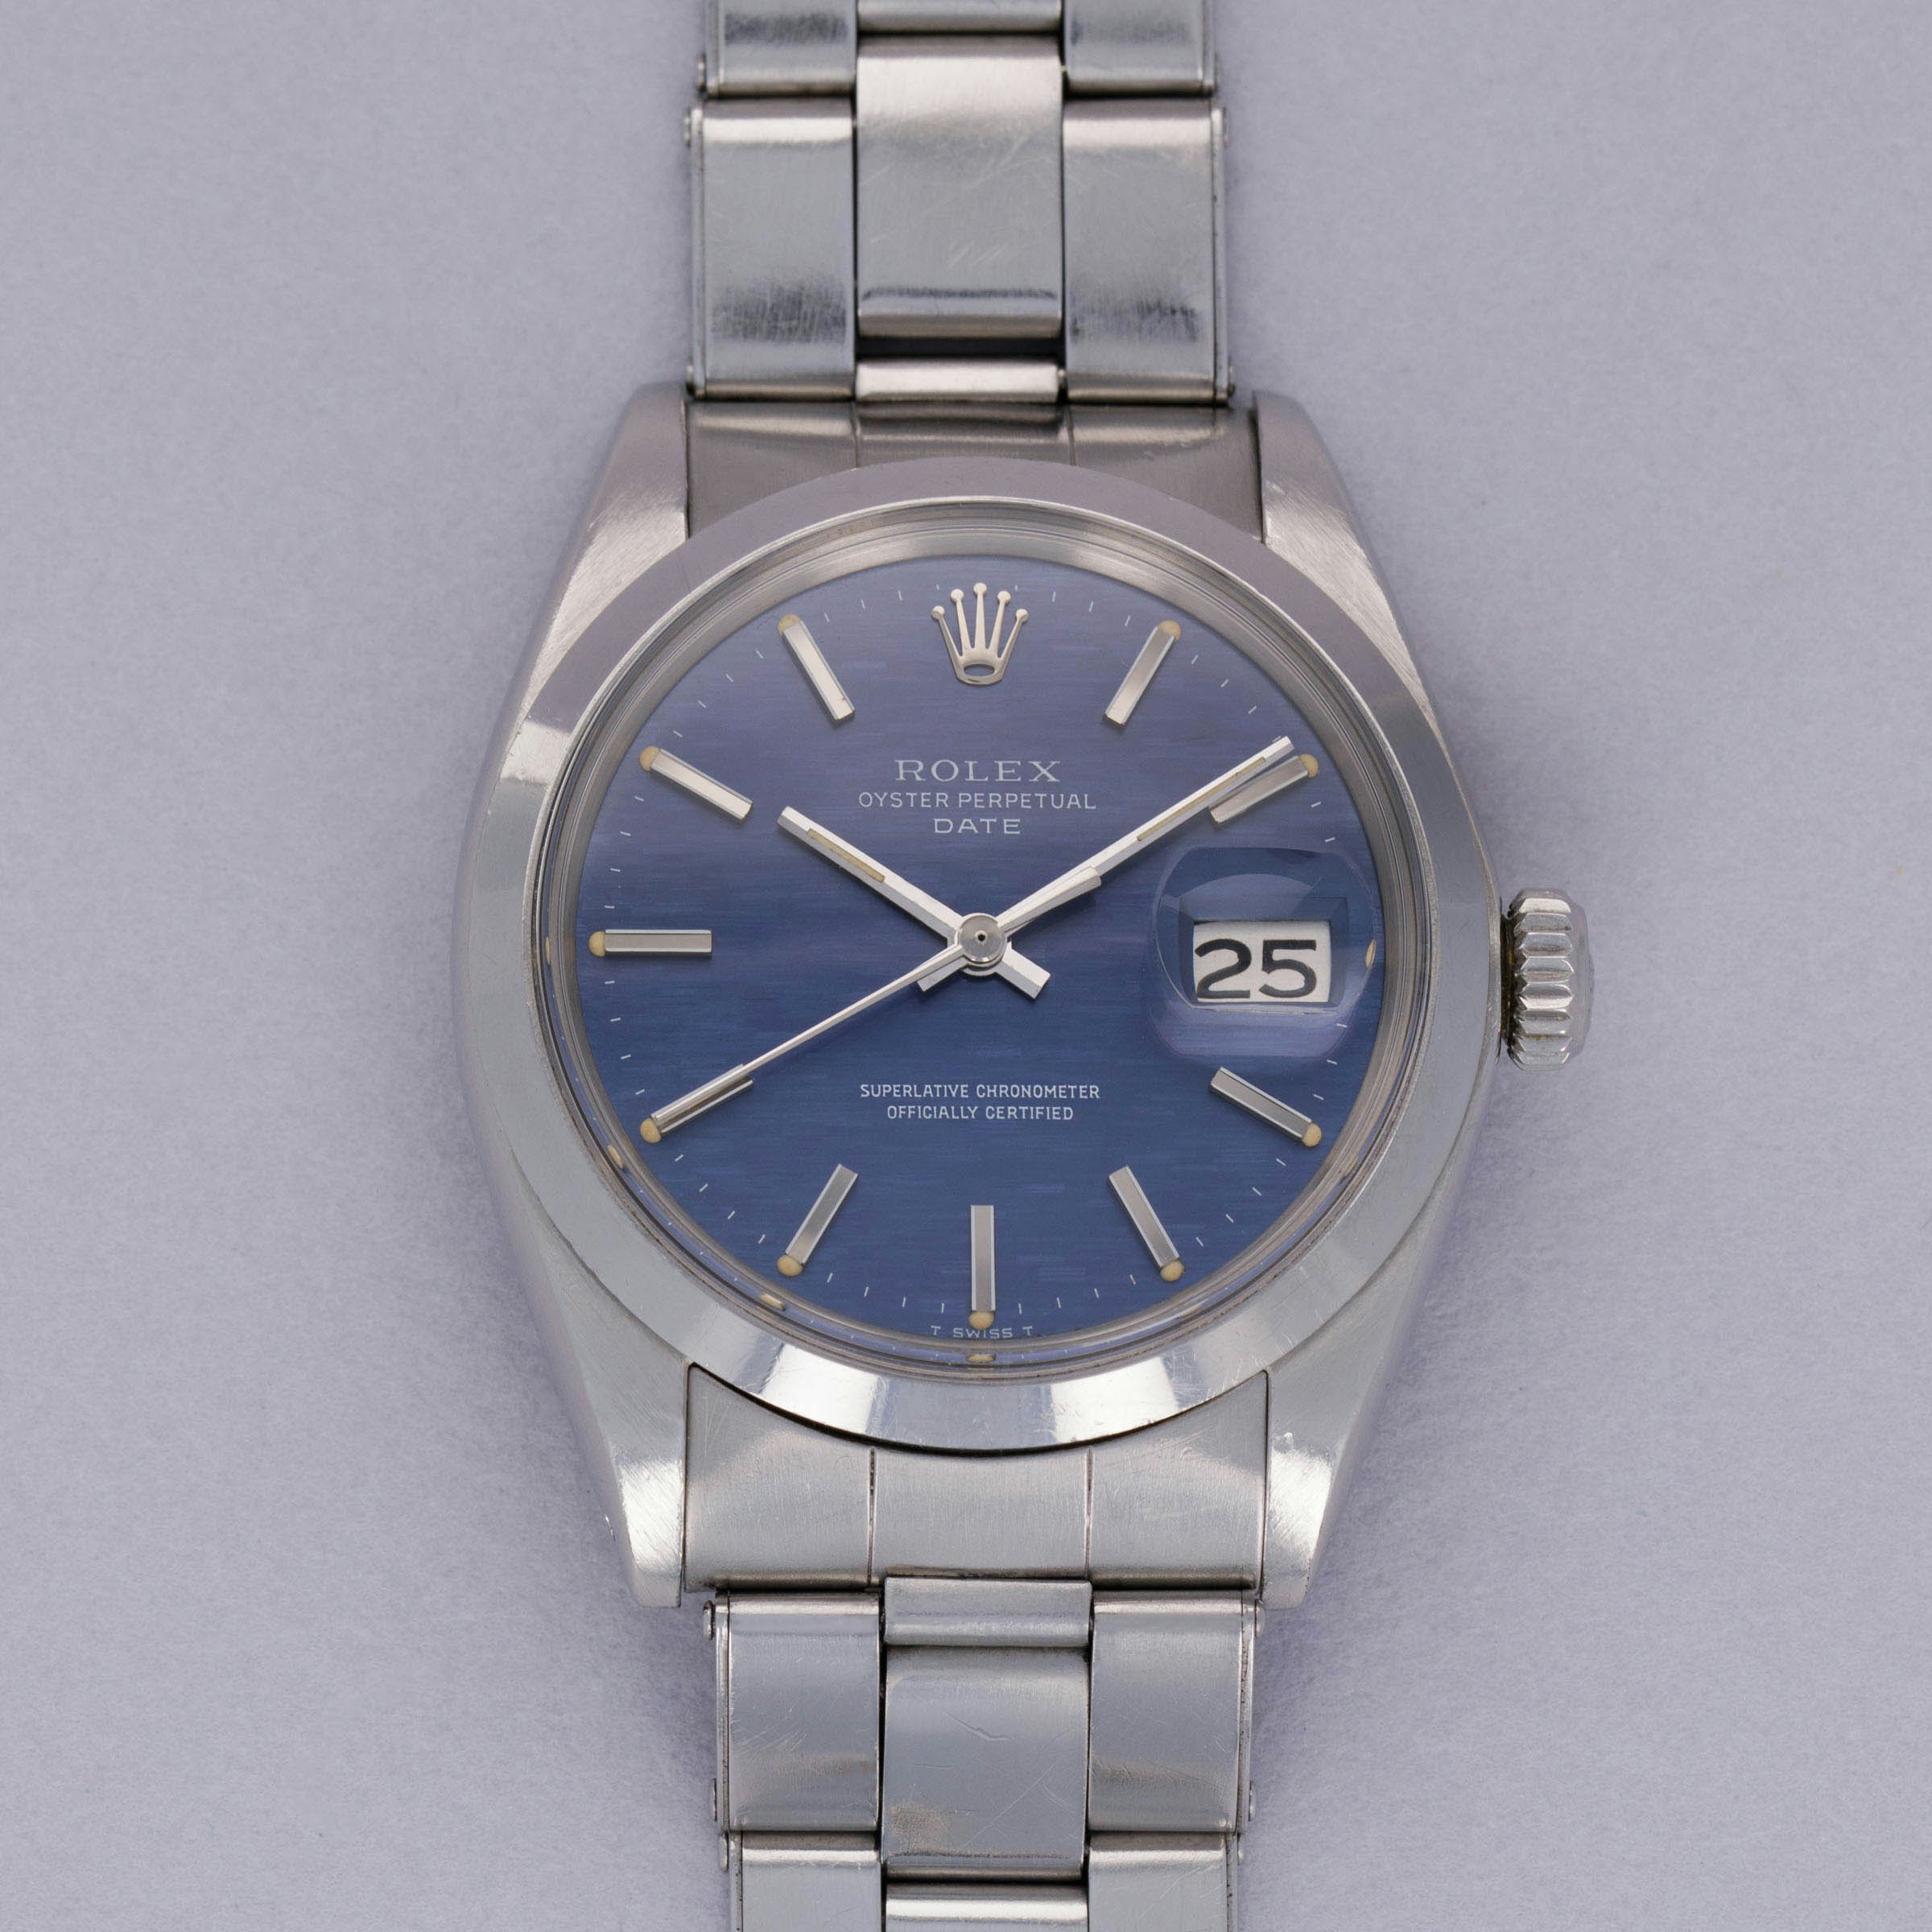 Thumbnail for Rolex Oyster Perpetual Date 1500 Blue Mosaic Dial